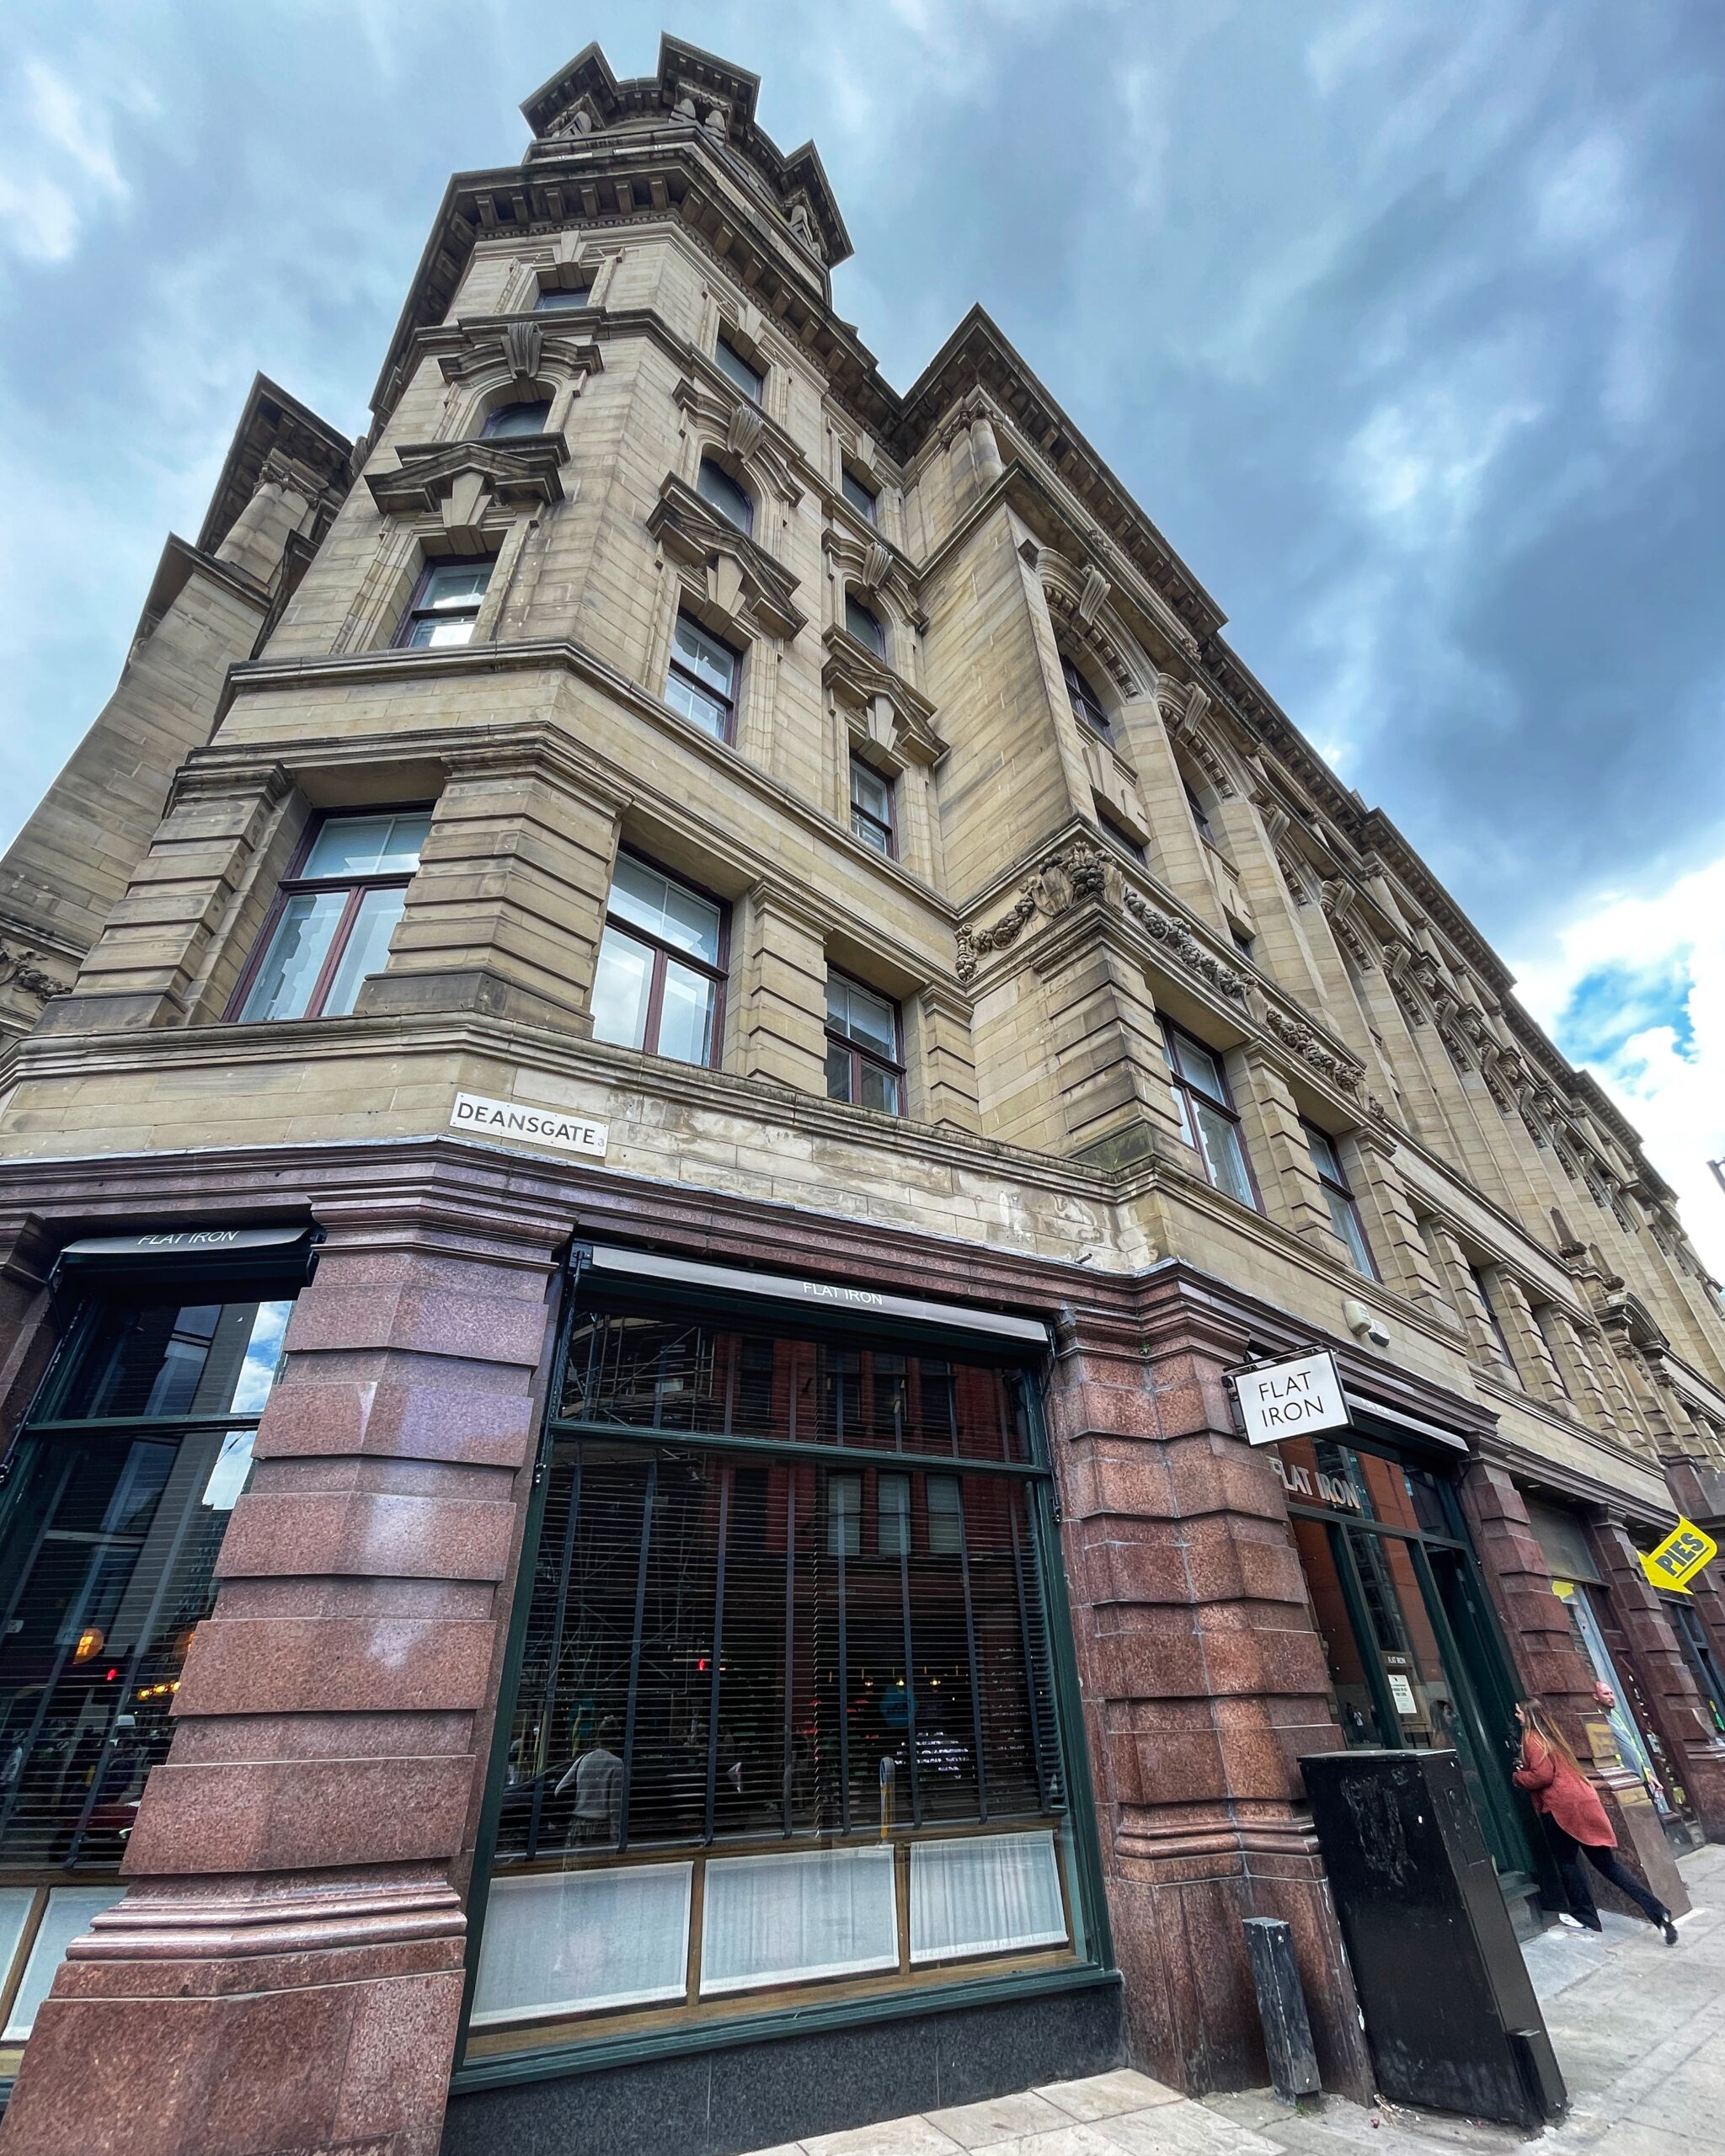 Flat Iron is ready to open on Deansgate in Manchester